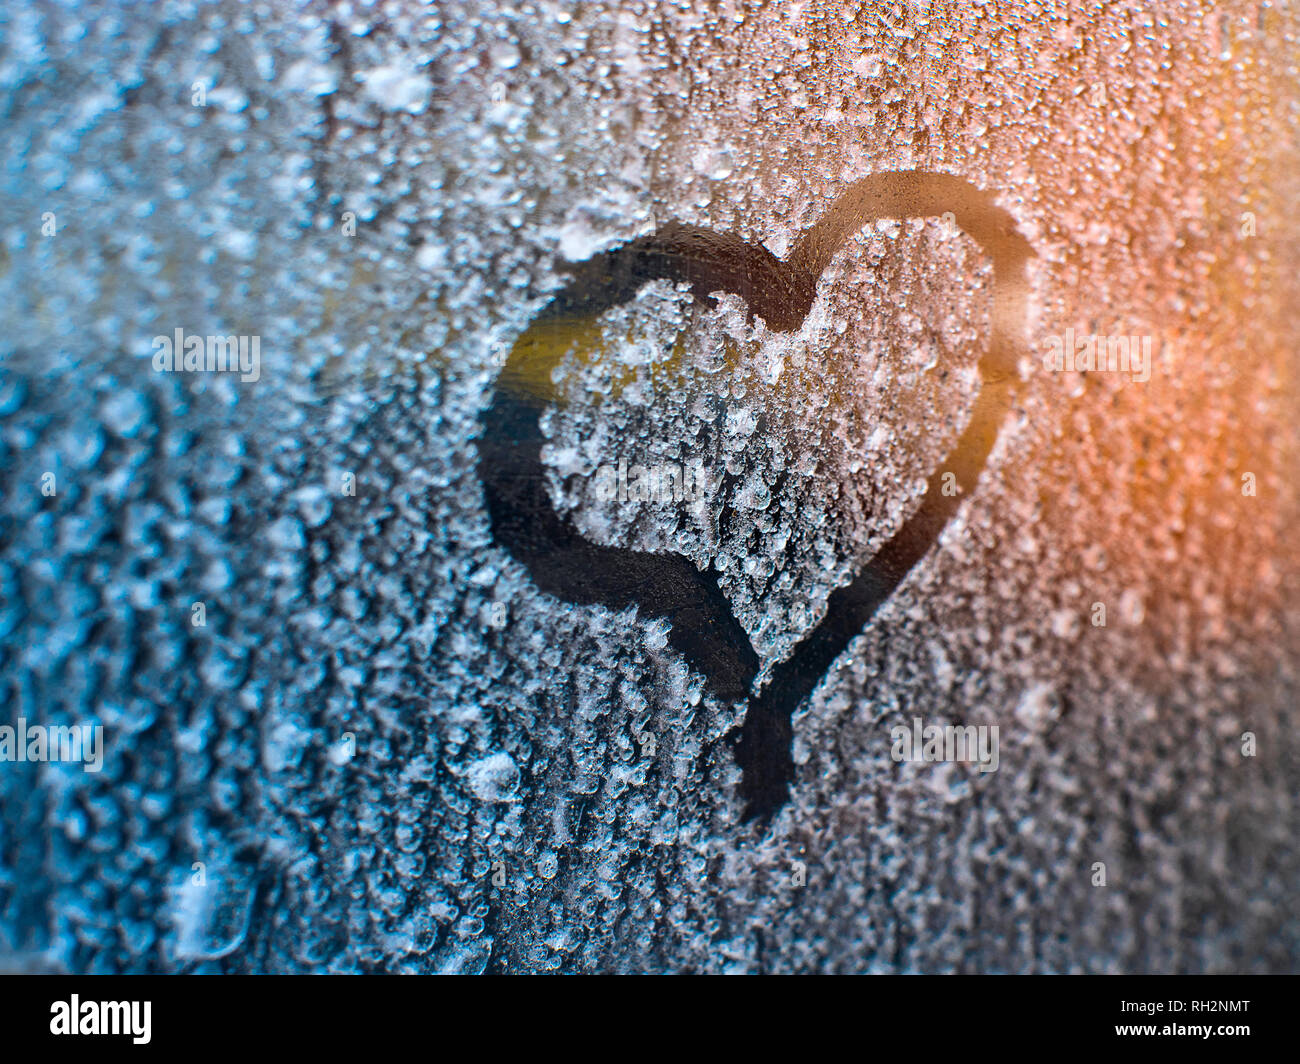 Drawn heart on the frozen window Valentines day concept. Stock Photo